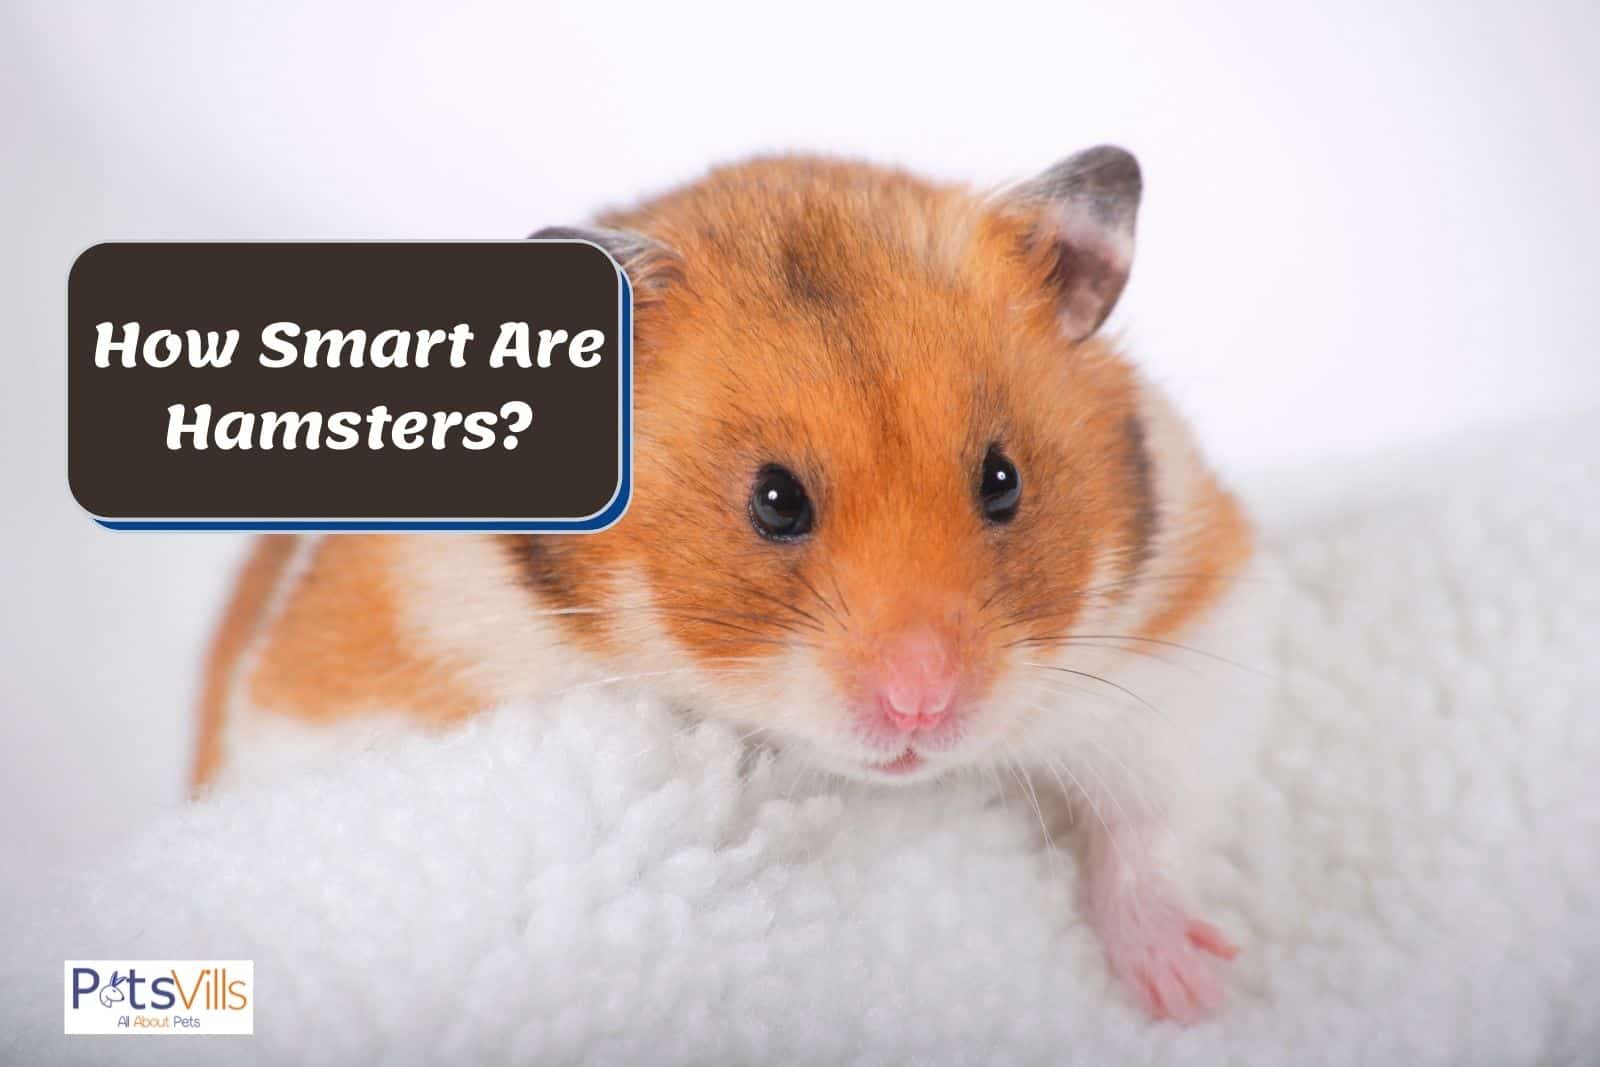 a cute hamster, how smart are hamsters